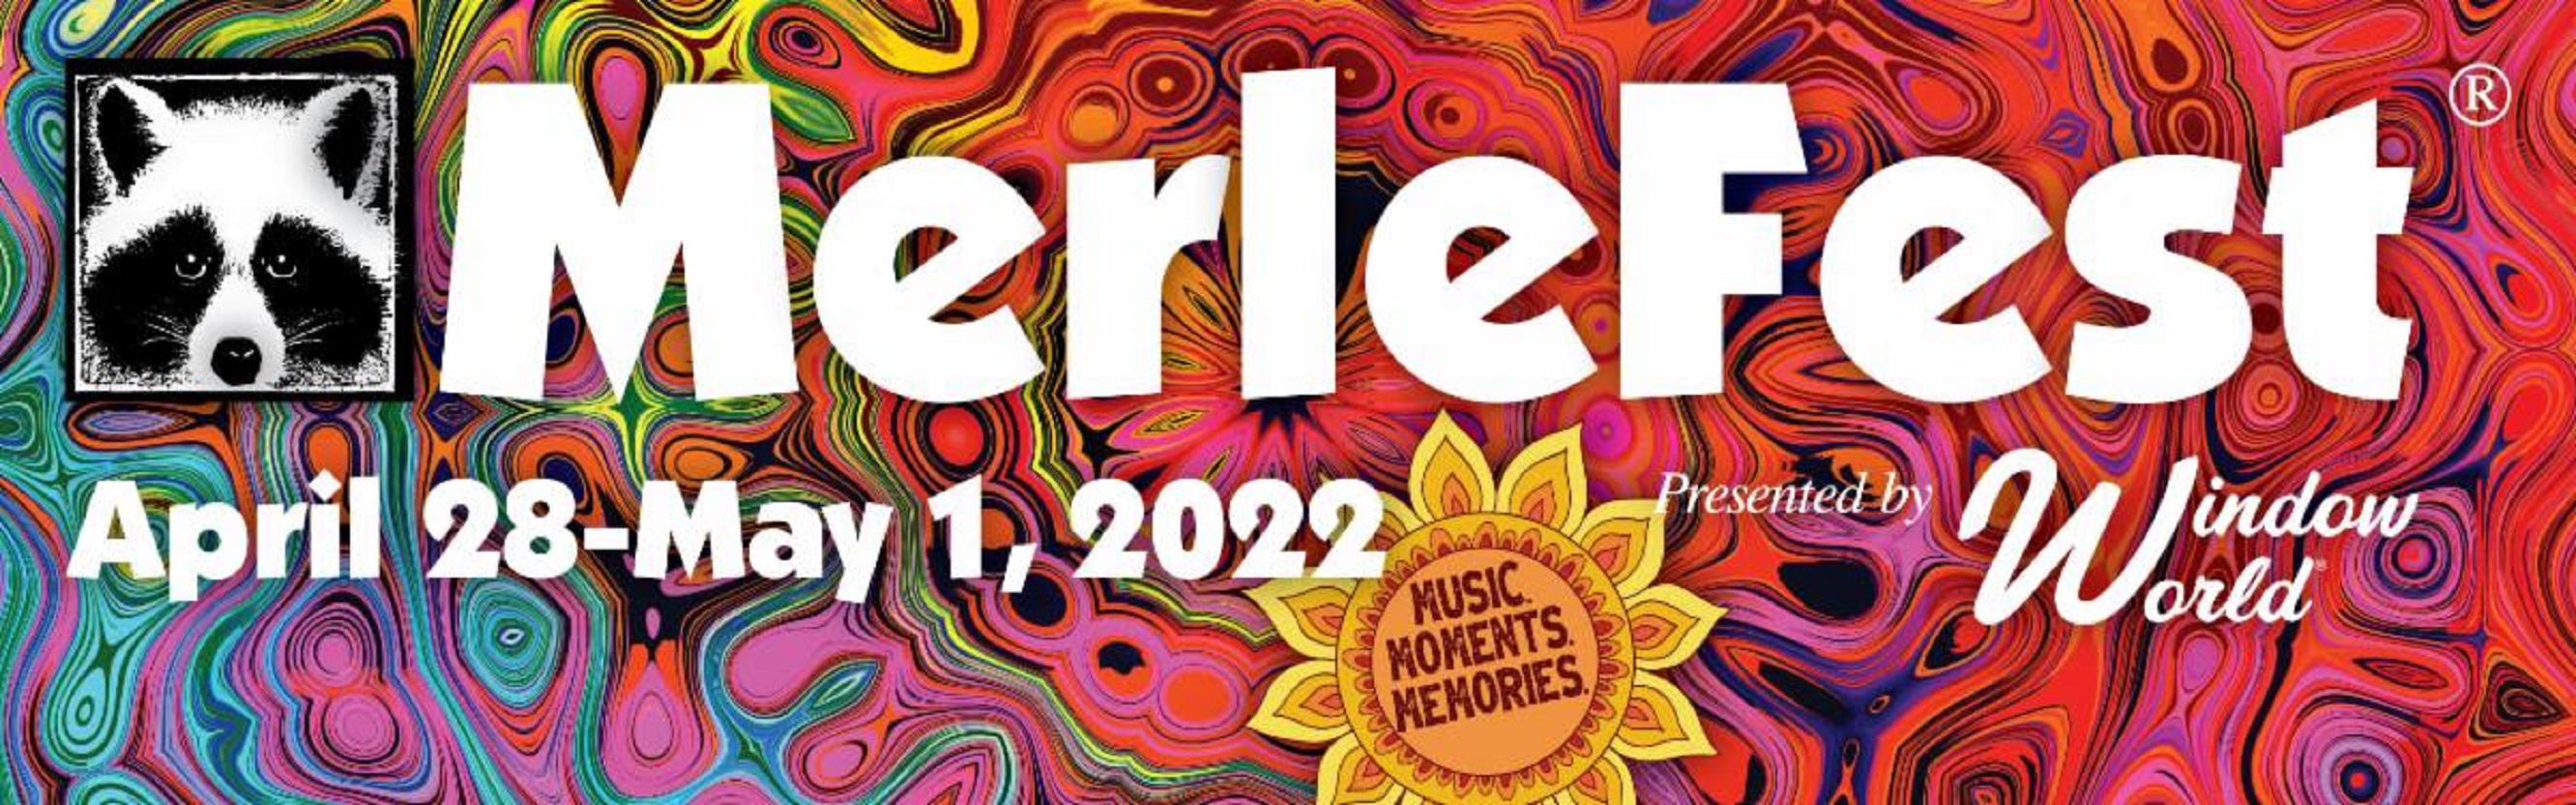 MerleFest 2022 Wraps Up Another Stellar Year Of “Traditional Plus” Performances